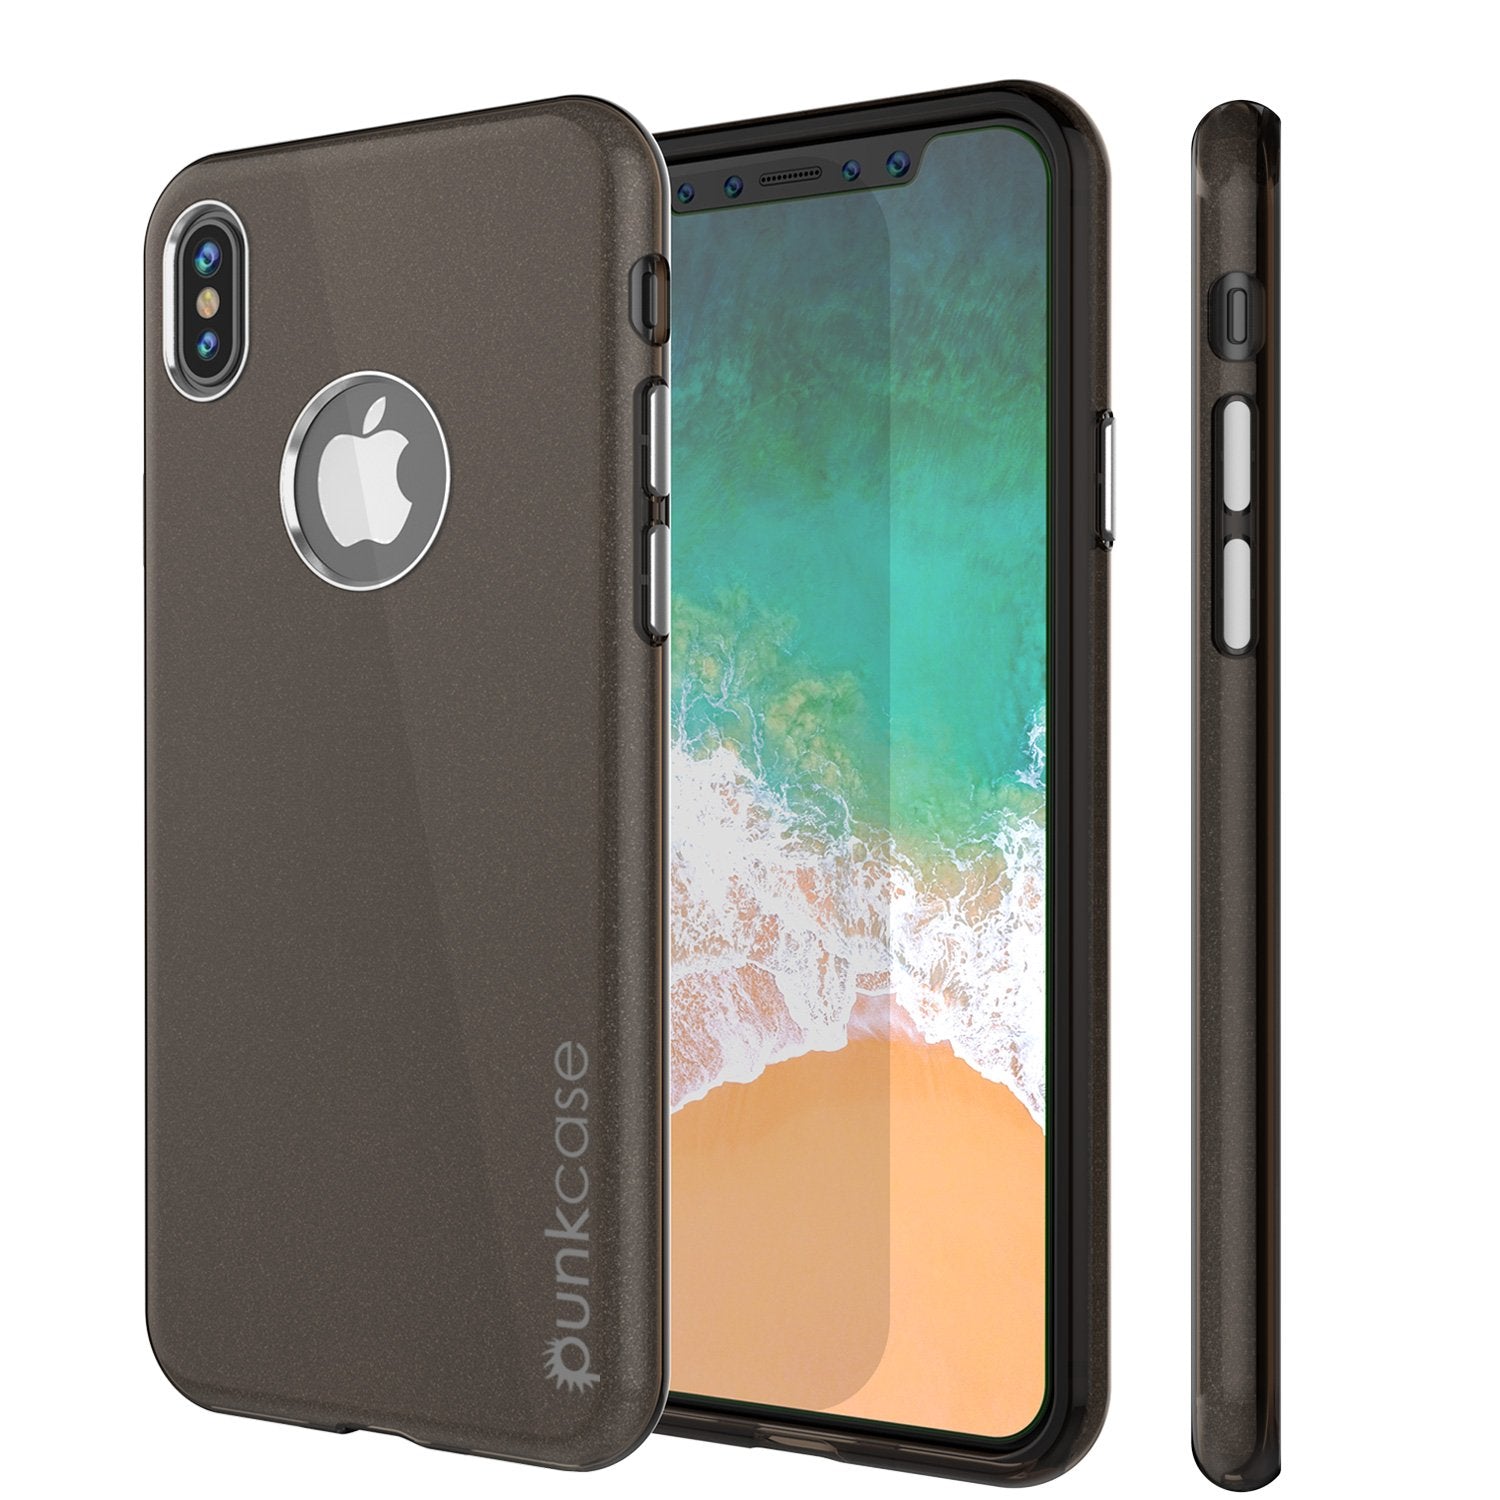 iPhone X Case, Punkcase Galactic 2.0 Series Ultra Slim w/ Tempered Glass Screen Protector | [Black/Grey]